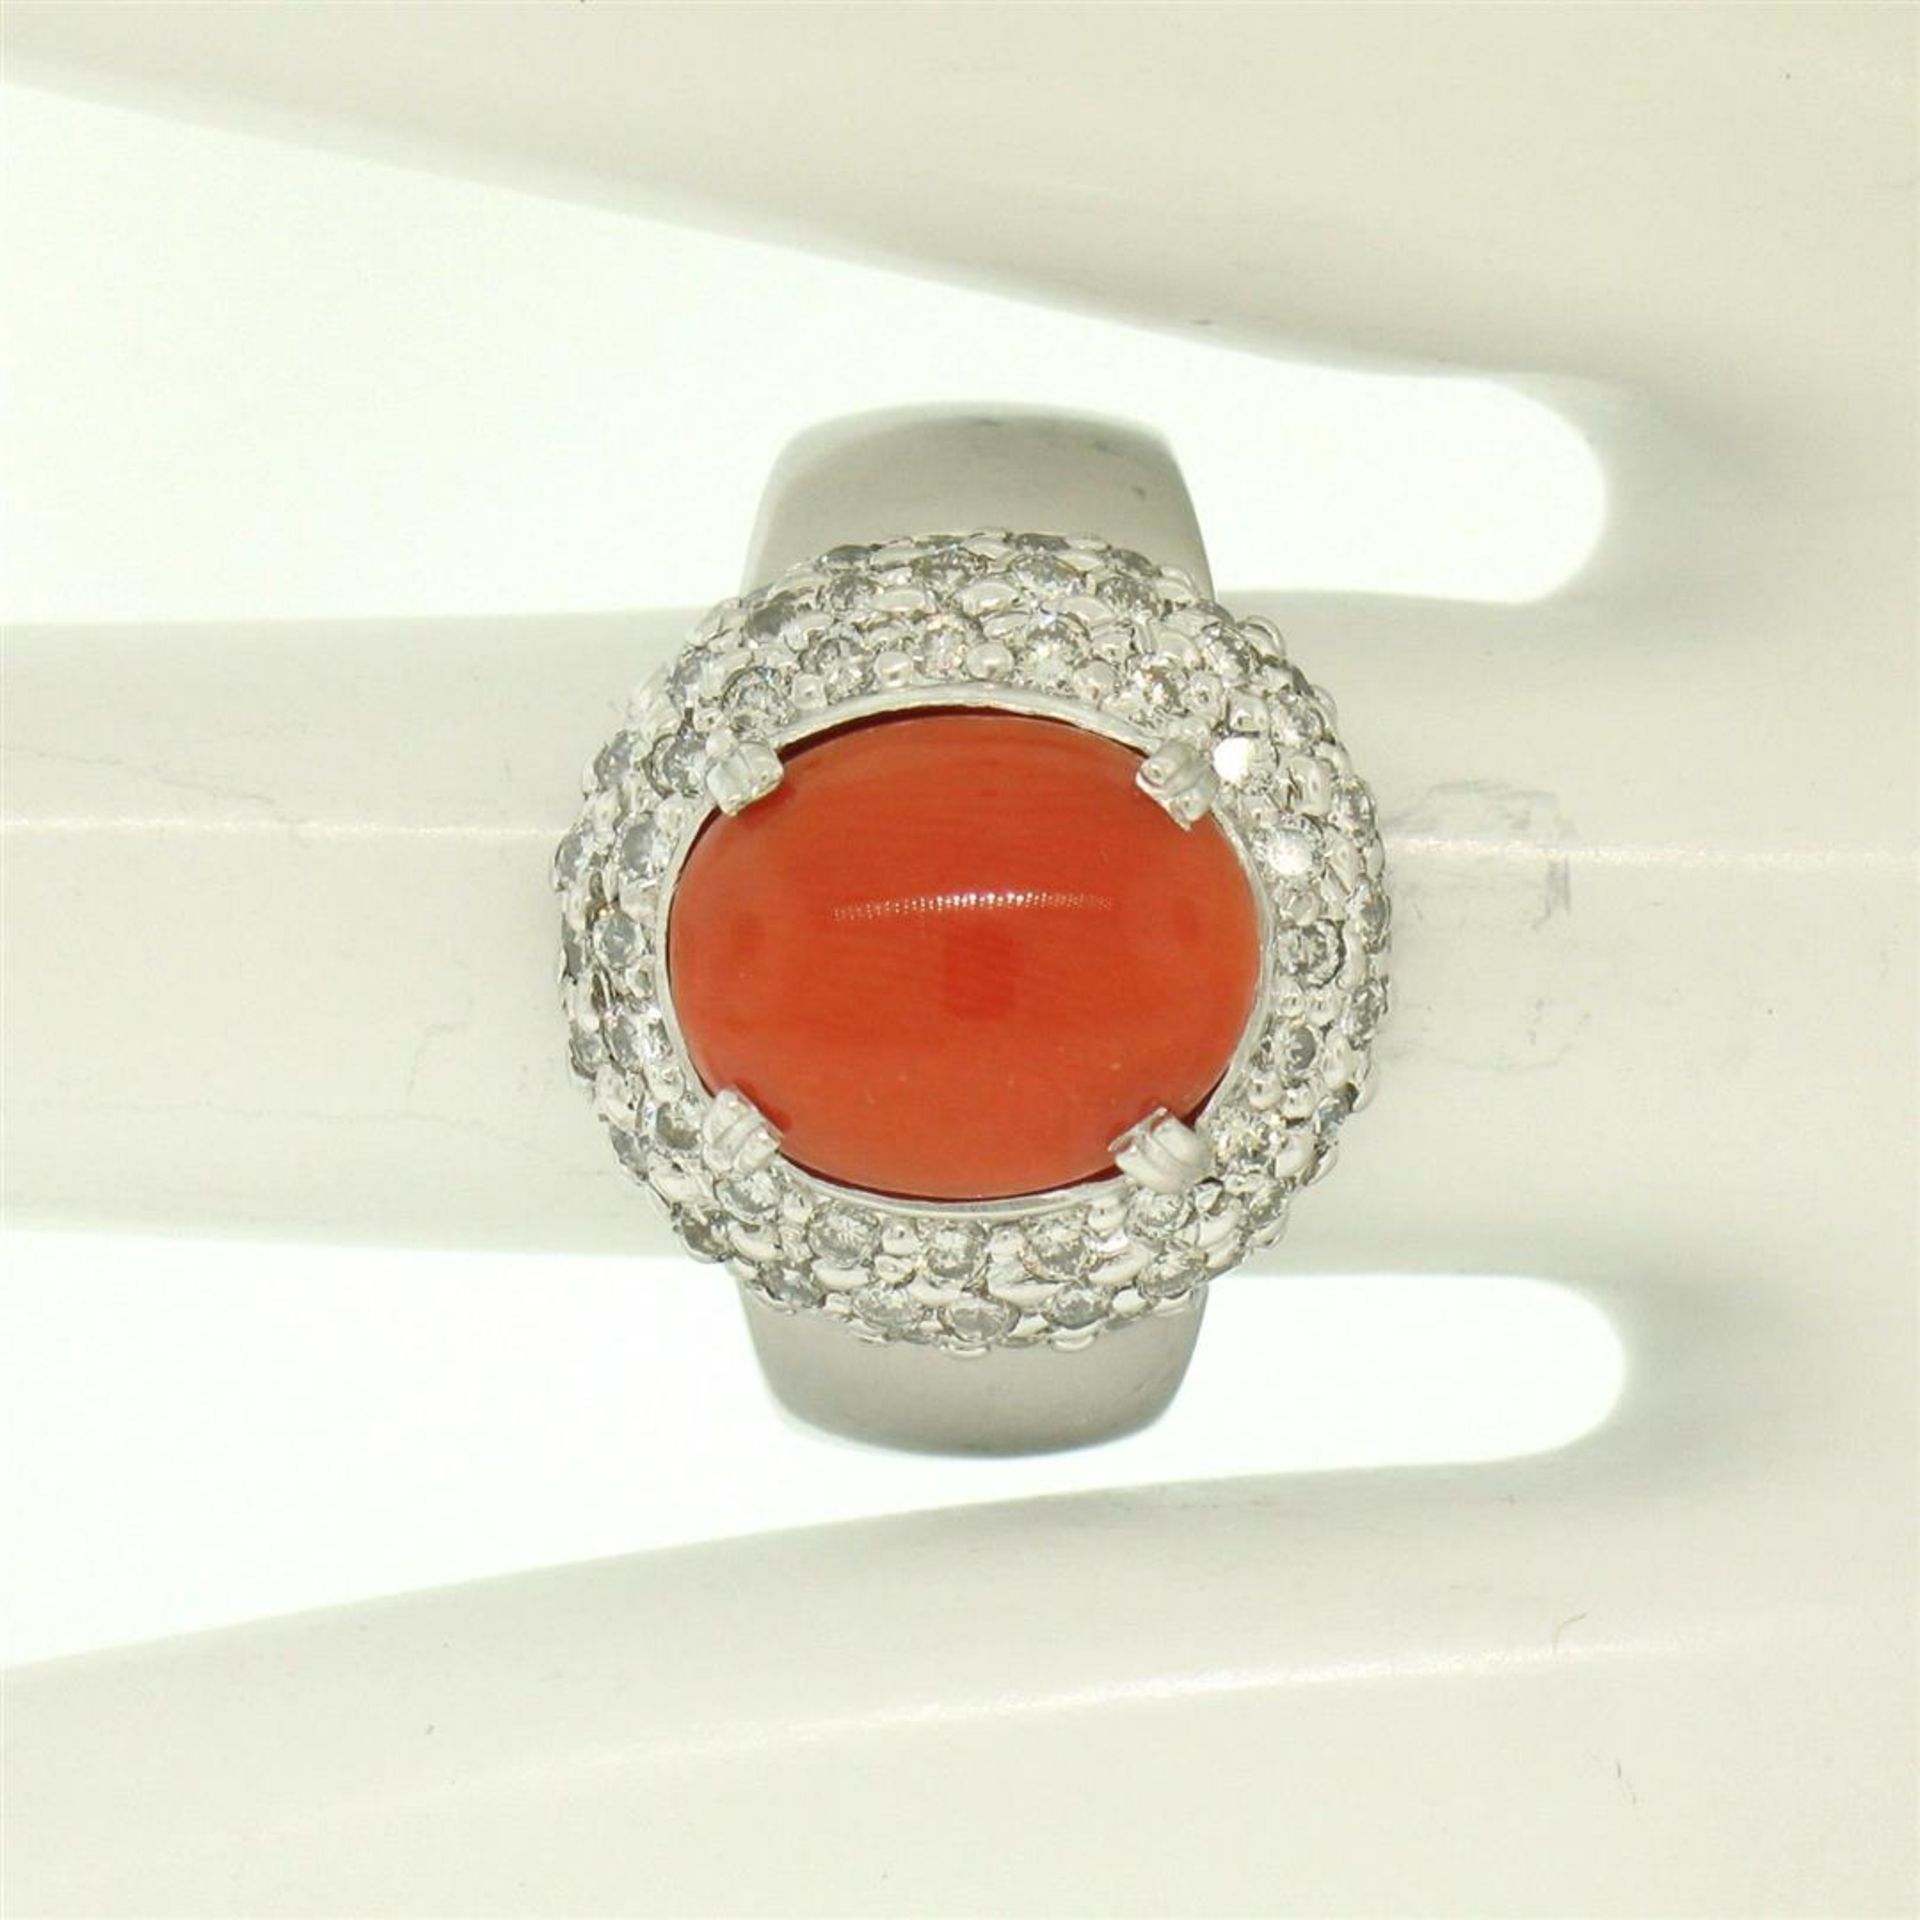 14kt White Gold Oval Cabochon Red Coral Ring w/ 2.10ctw Diamond Halo - Image 4 of 8